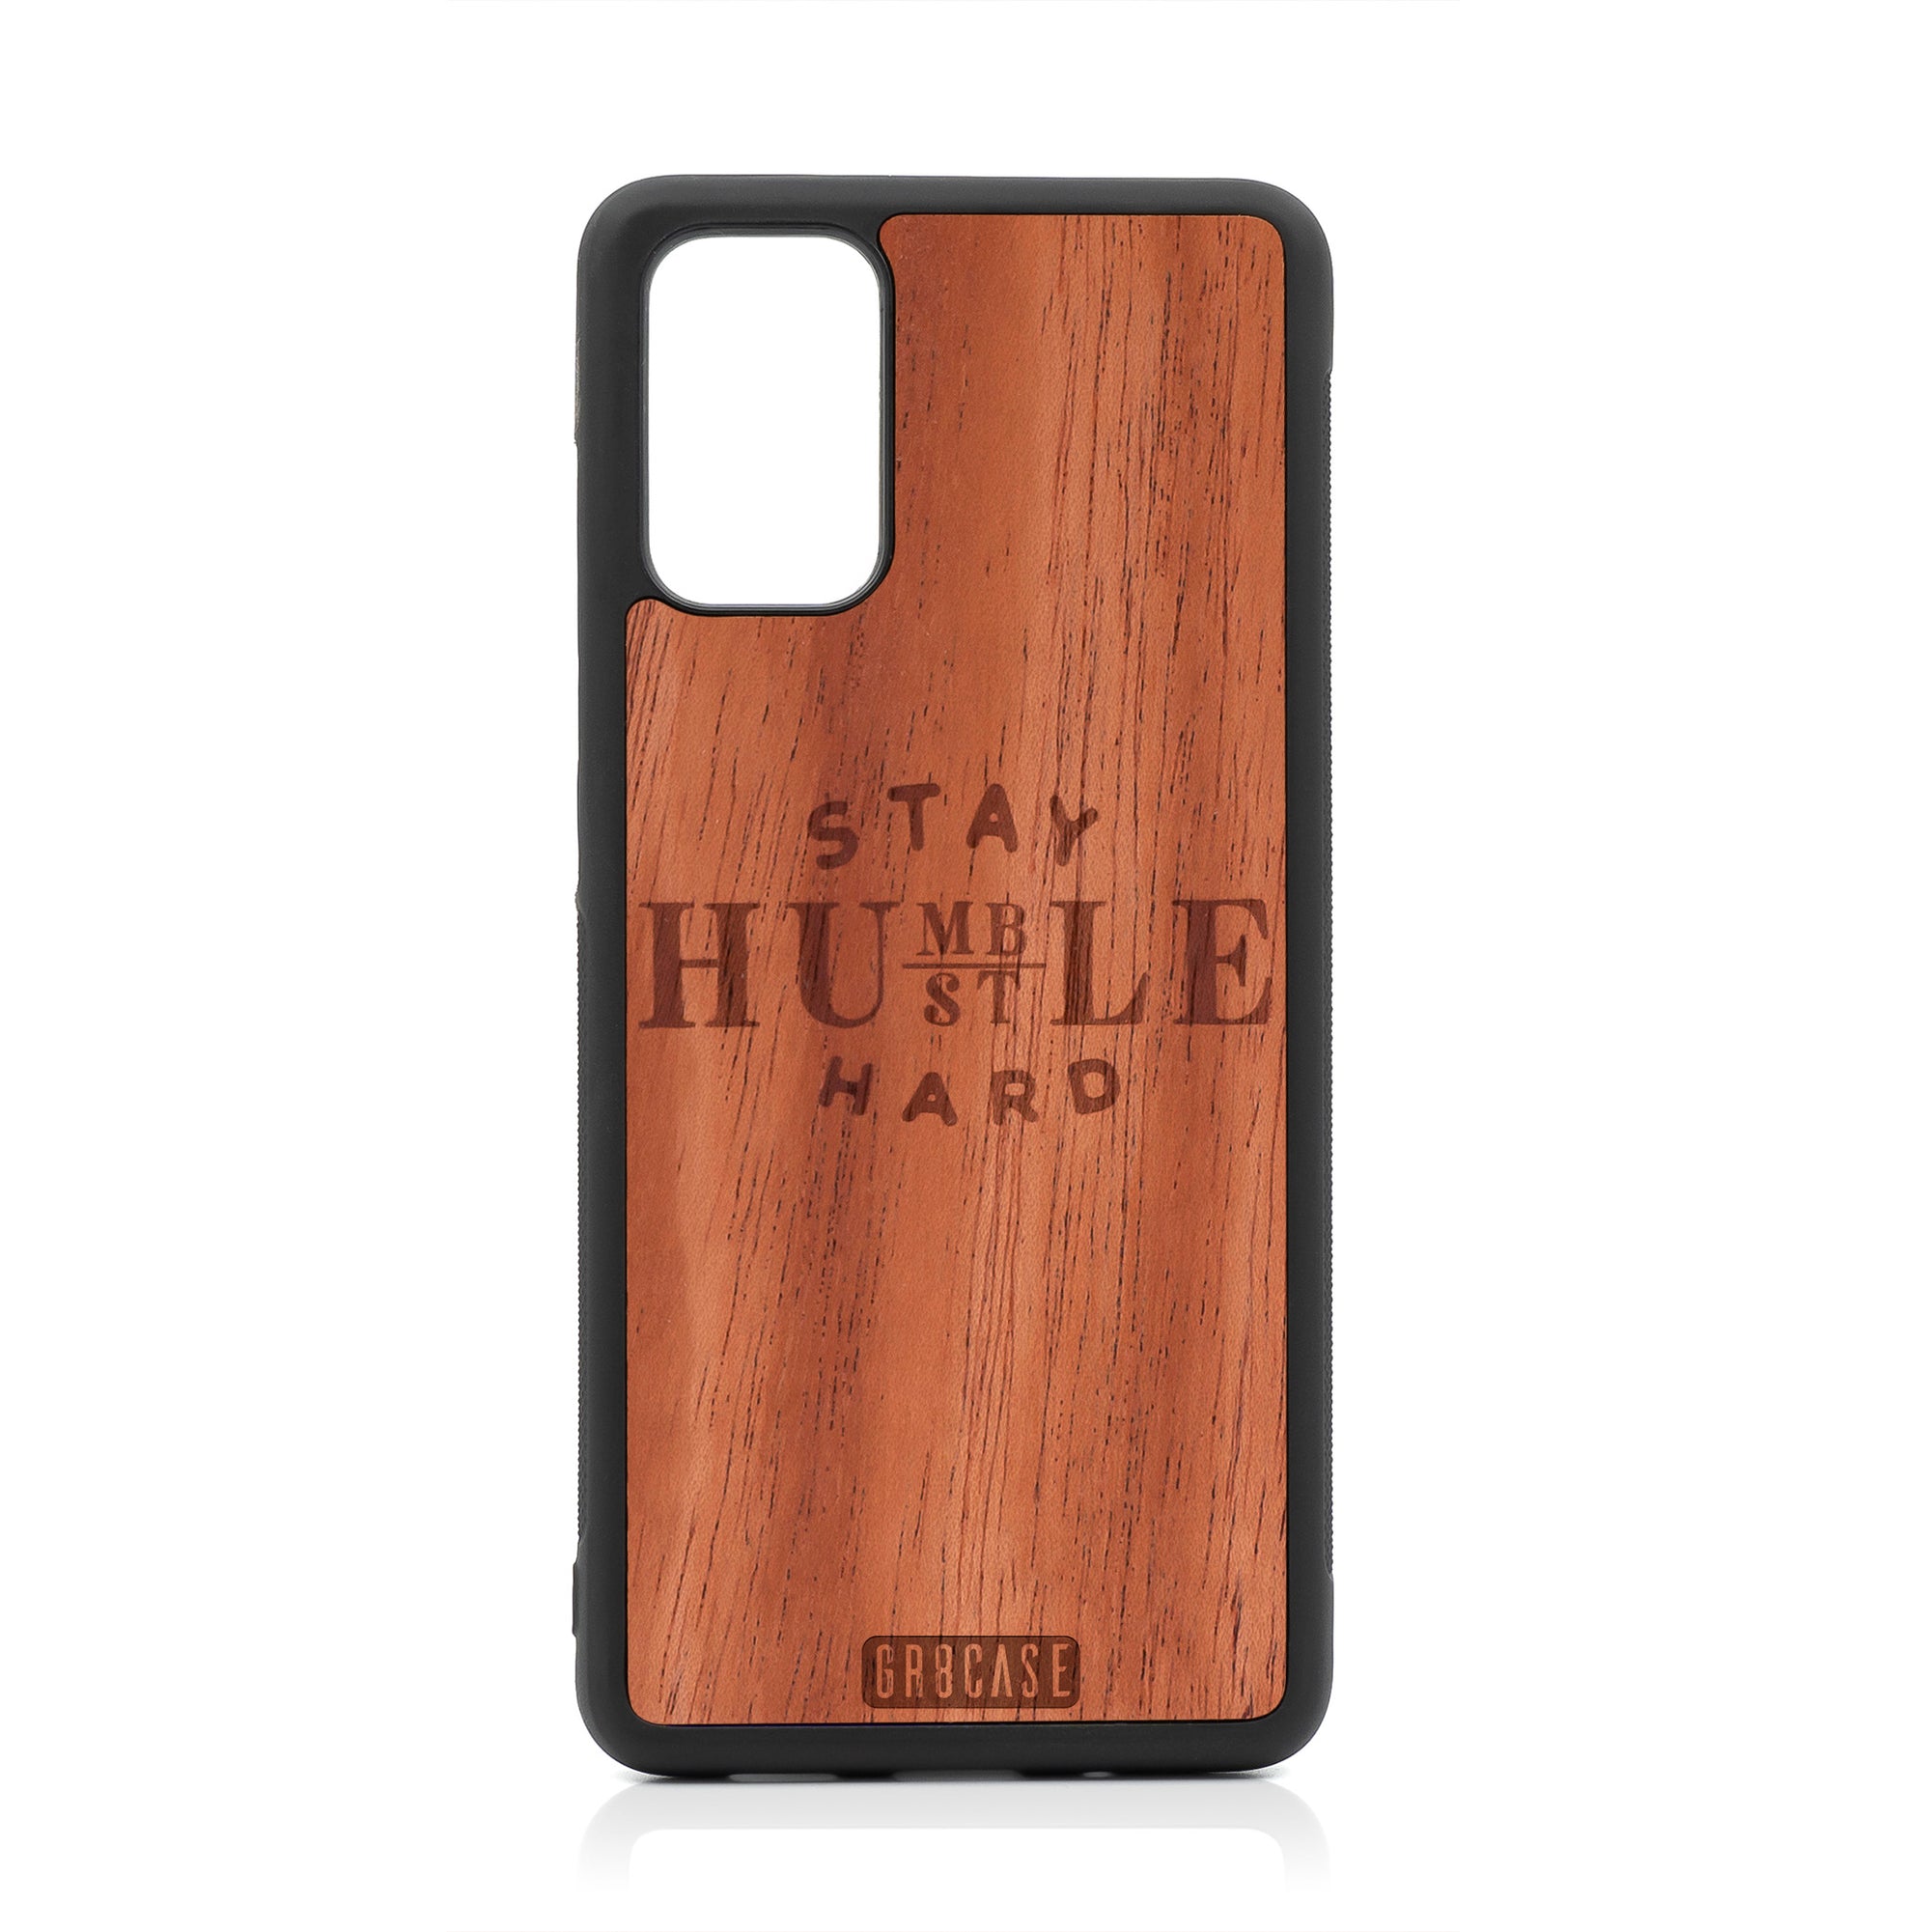 Stay Humble Hustle Hard Design Wood Case For Samsung Galaxy S20 Plus by GR8CASE